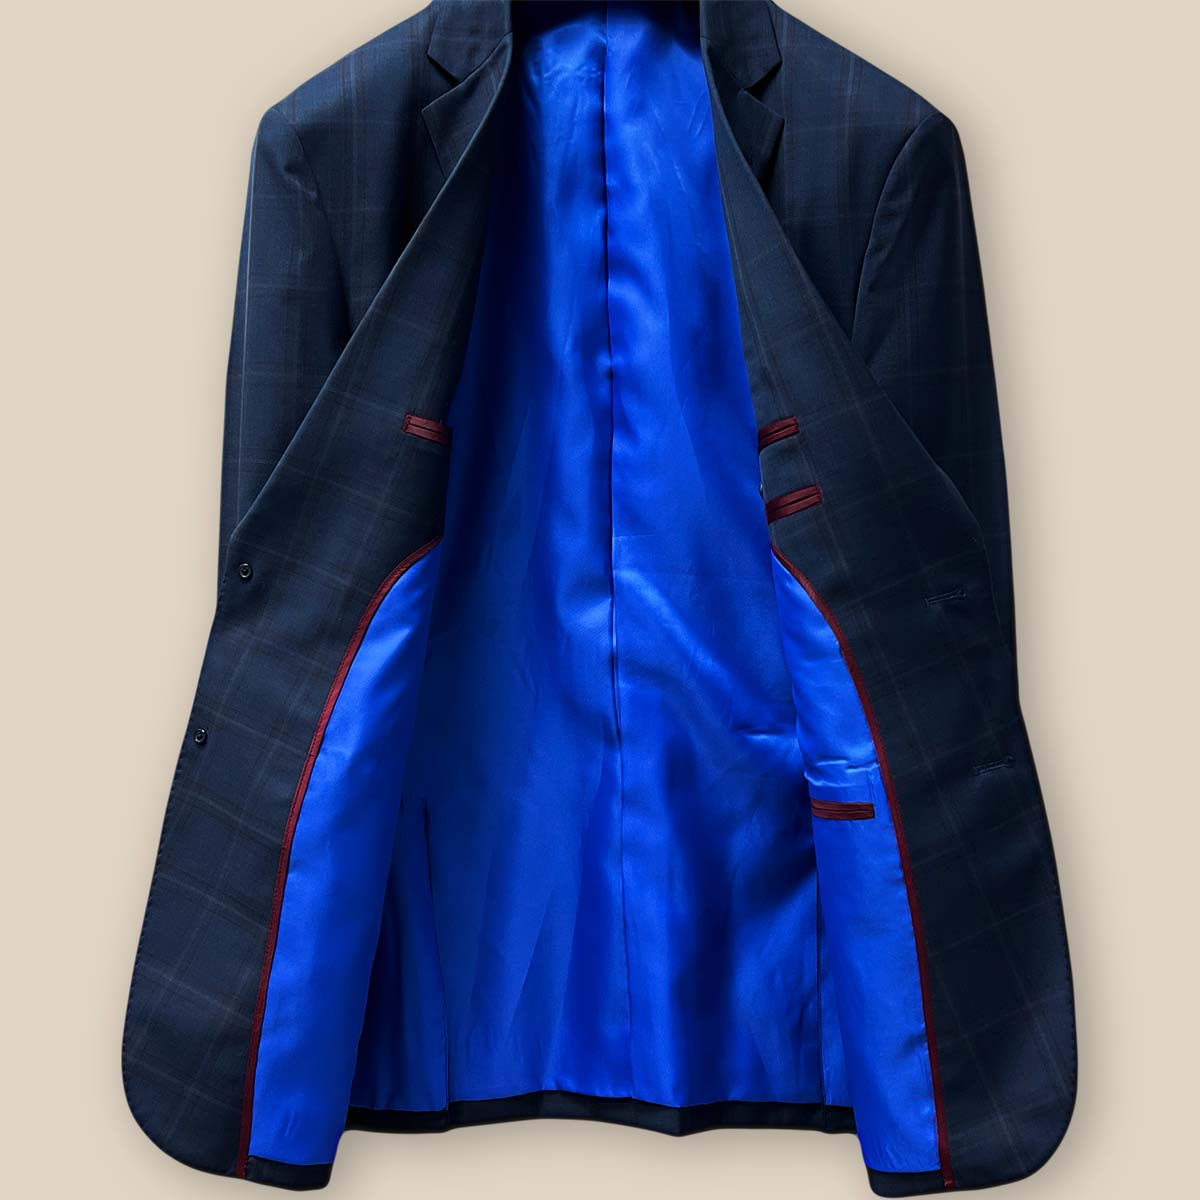 Full view of the sportcoat's interior highlighting the royal blue lining and maroon piping details.